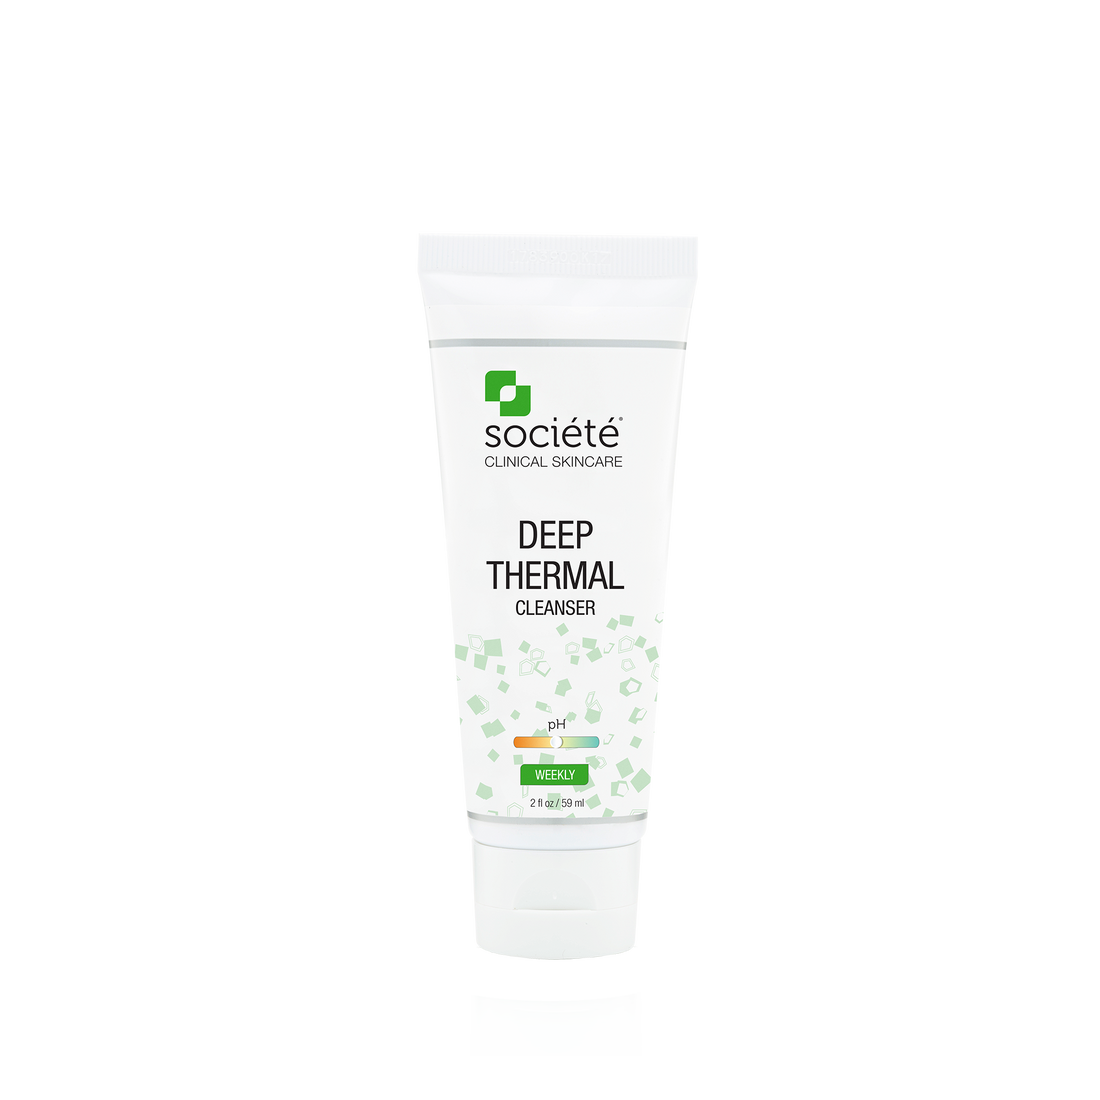 DEEP Thermal Cleanser 59ml